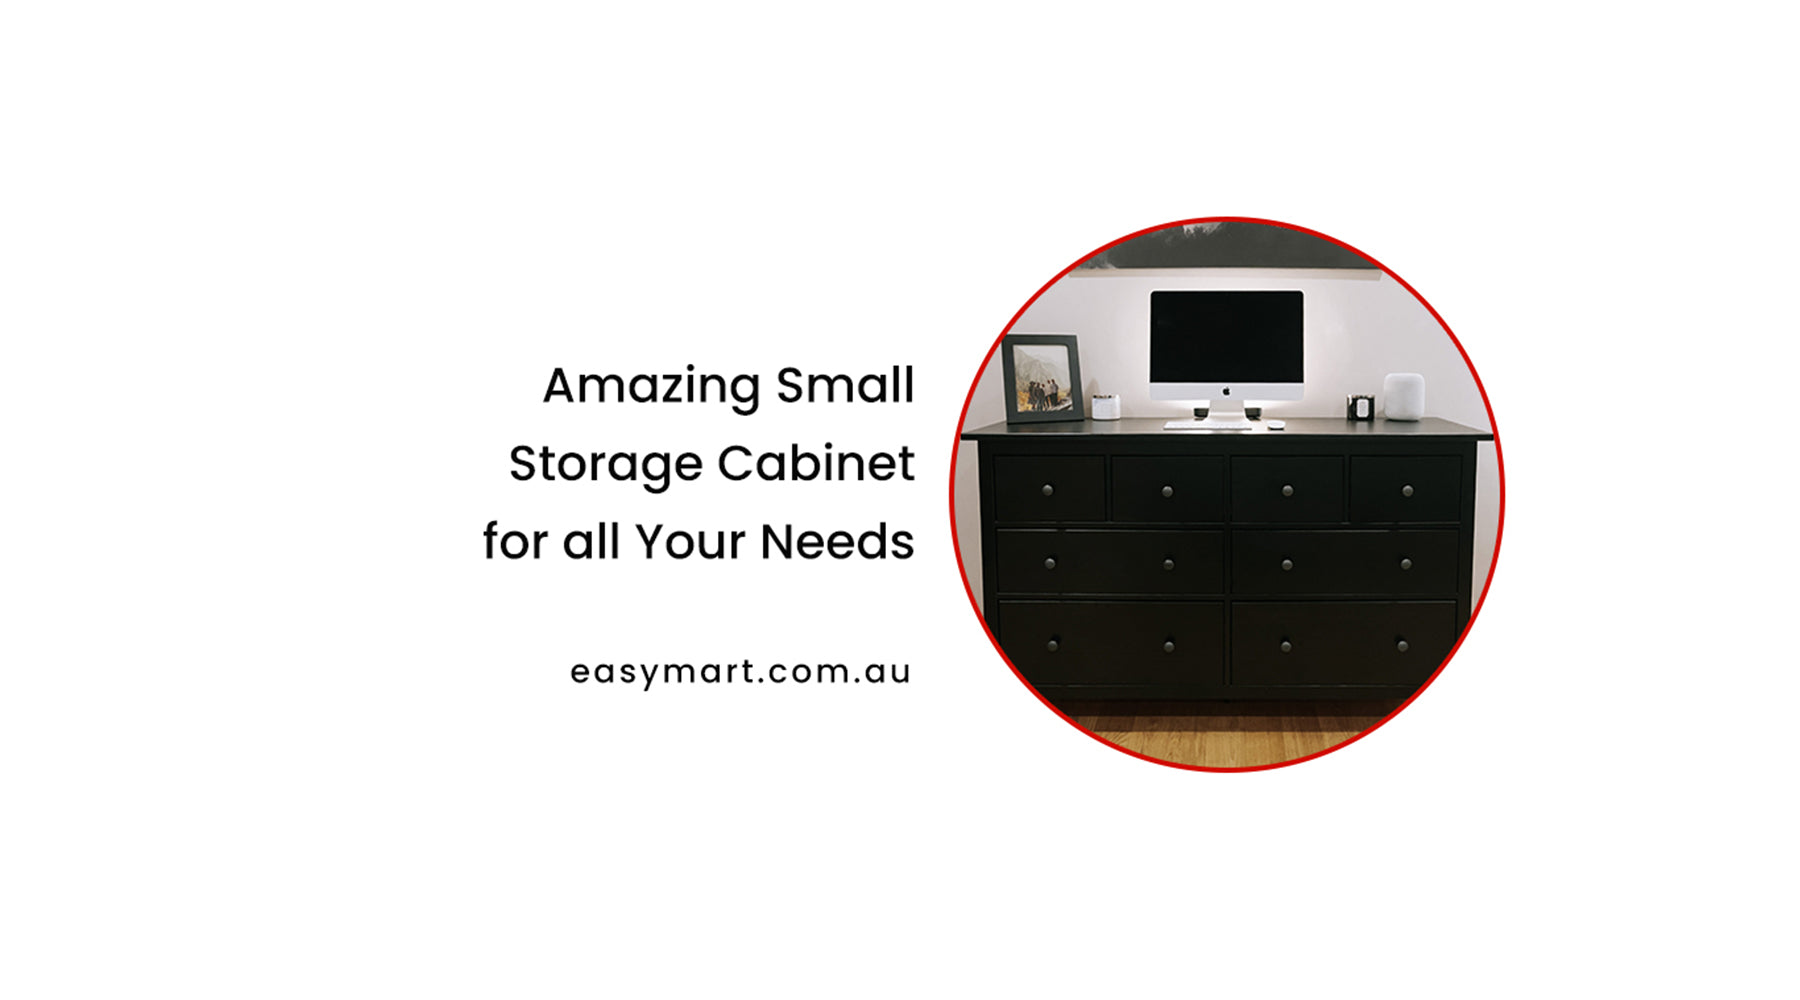 Amazing Small Storage Cabinet for all Your Needs